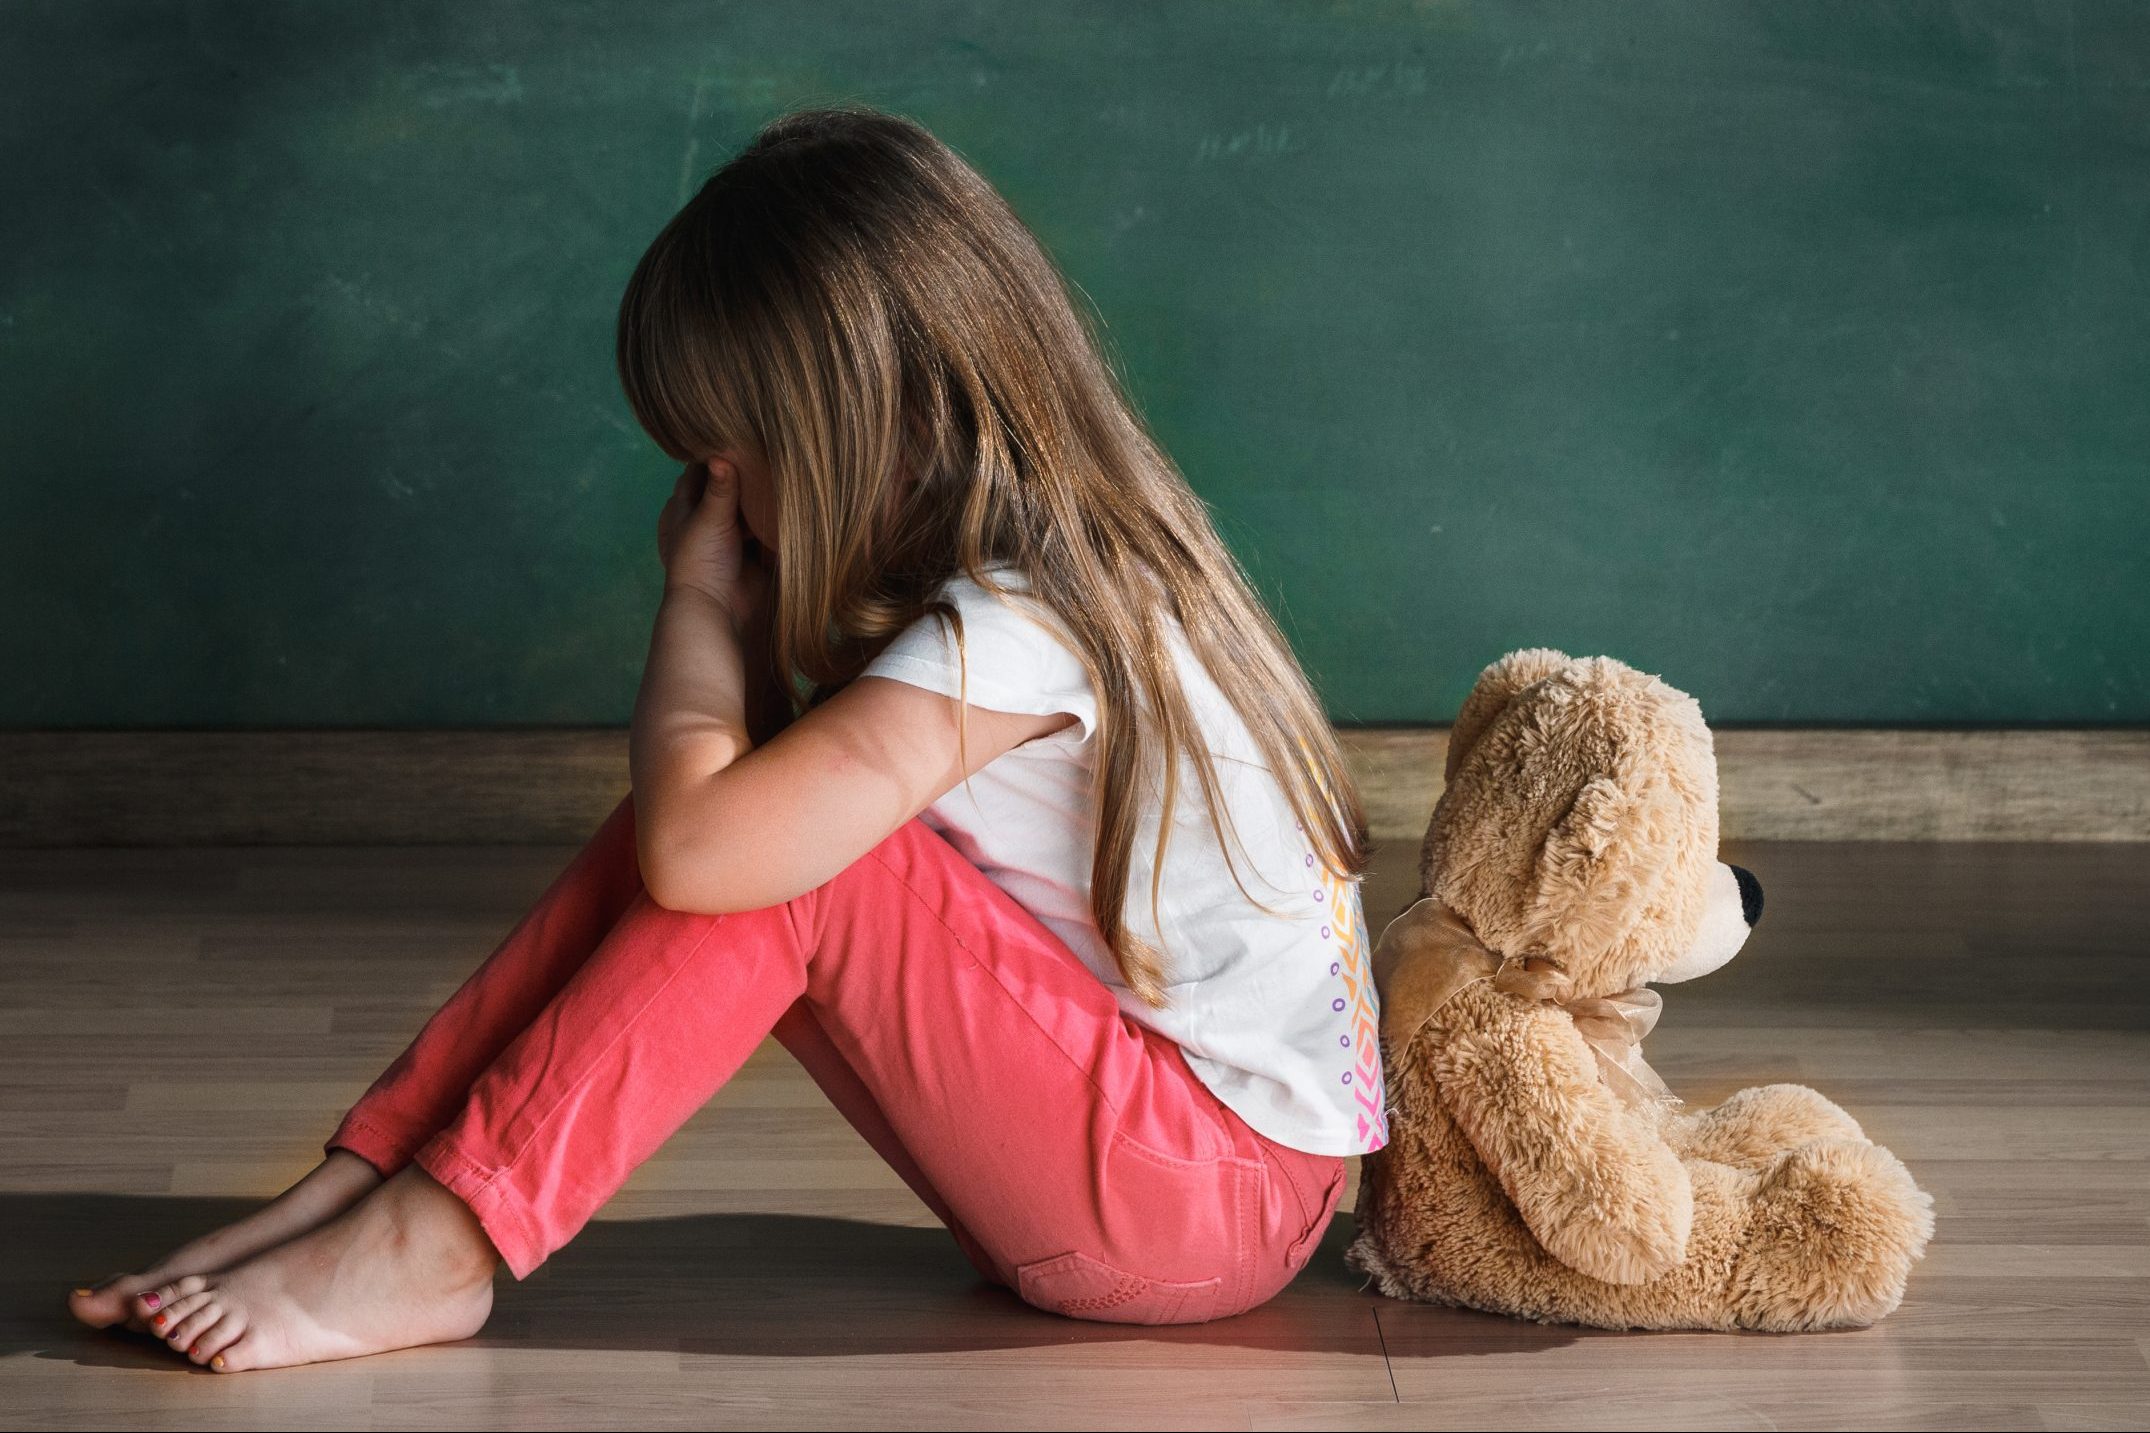 Young girl sitting with teddy bear